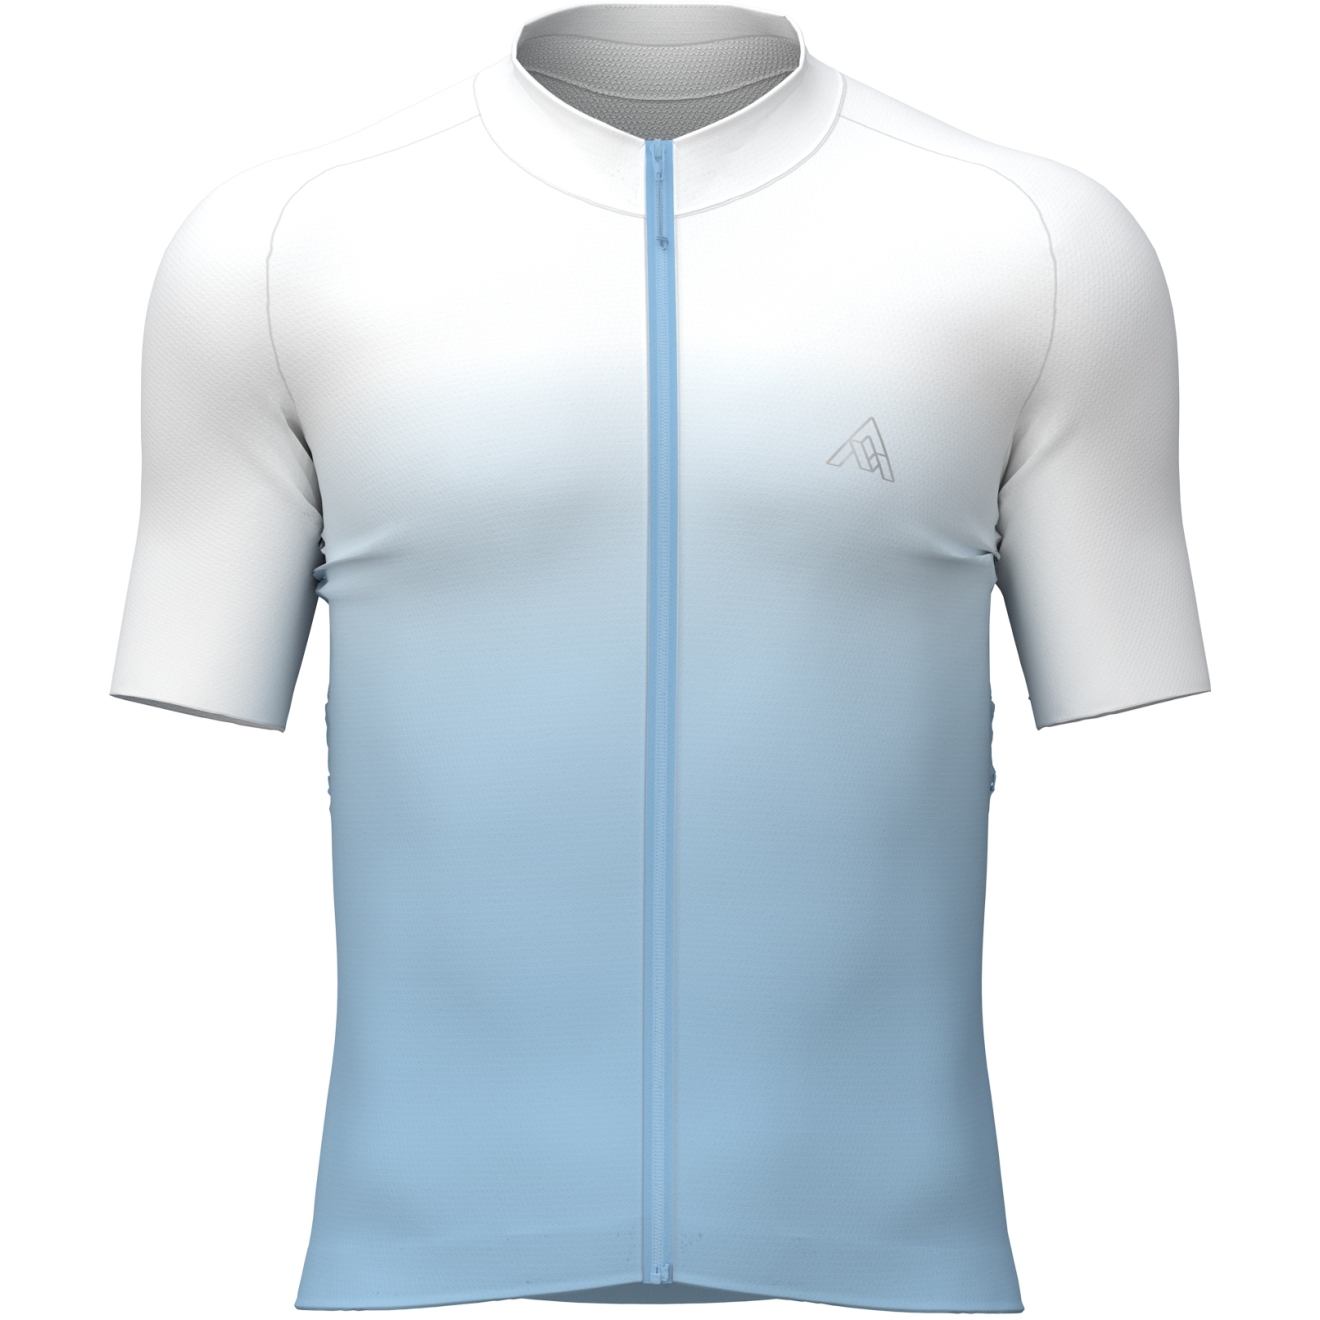 Image de 7mesh Maillot Manches Courtes - Skyline - Early Dawn